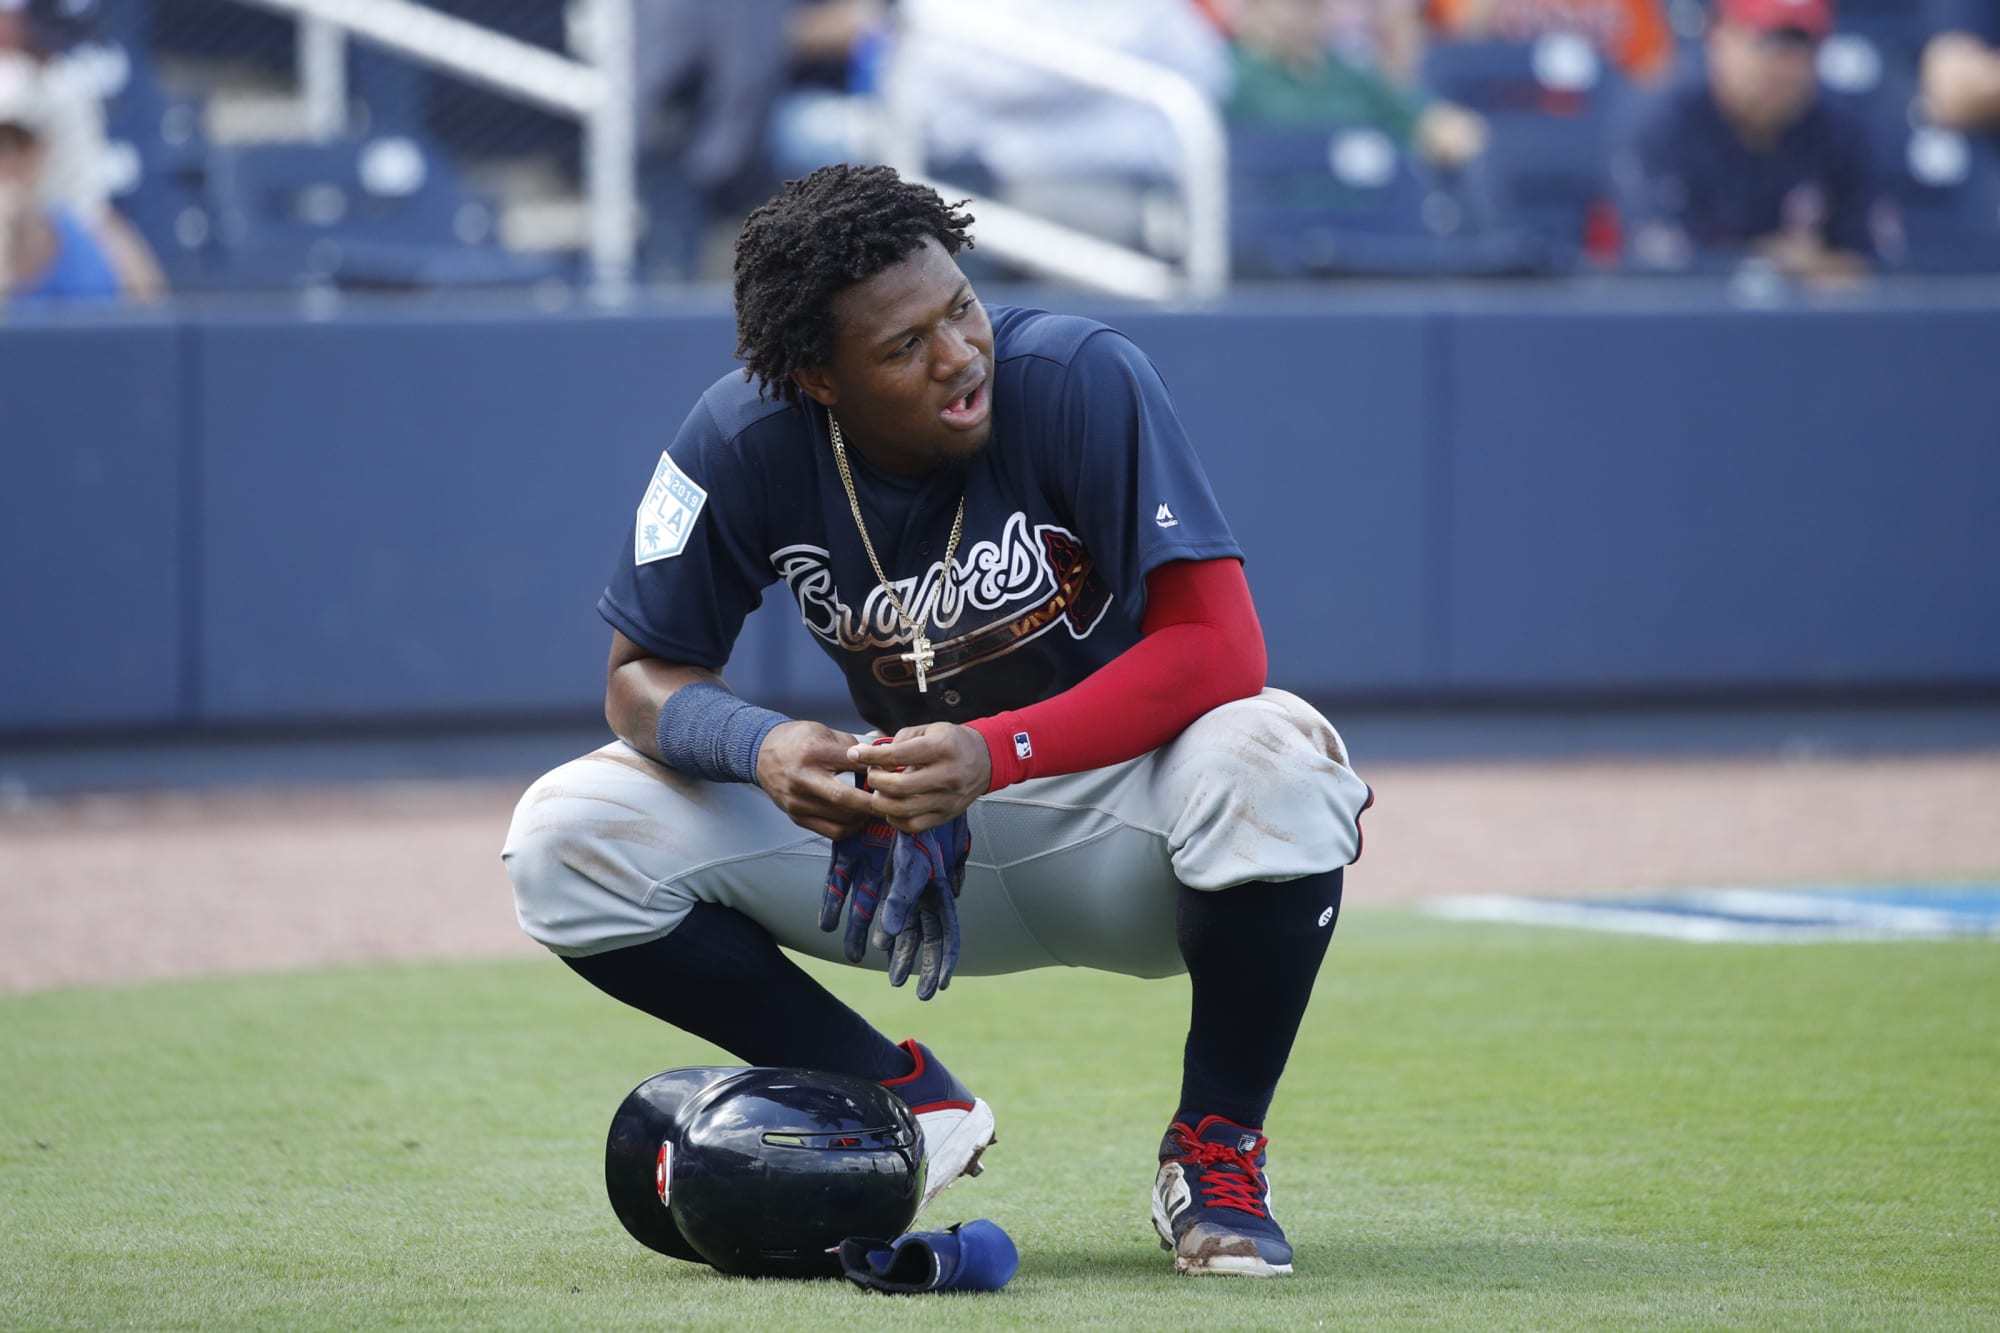 Atlanta Braves What do recent contracts mean for us?